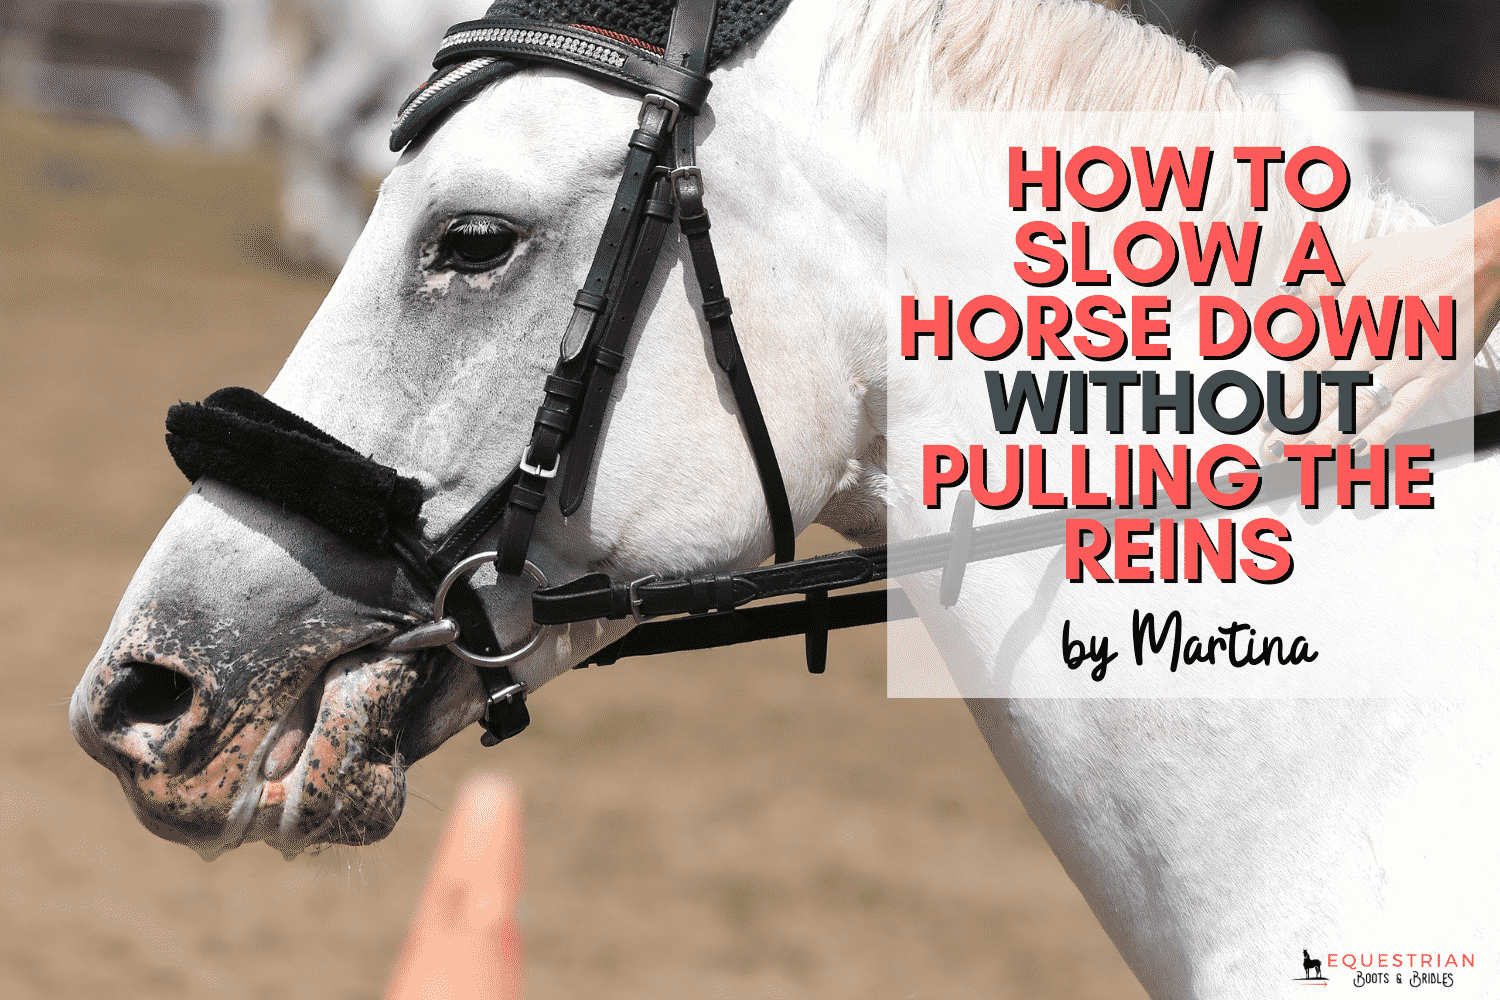 How to Slow A Horse Down Without Pulling The Reins